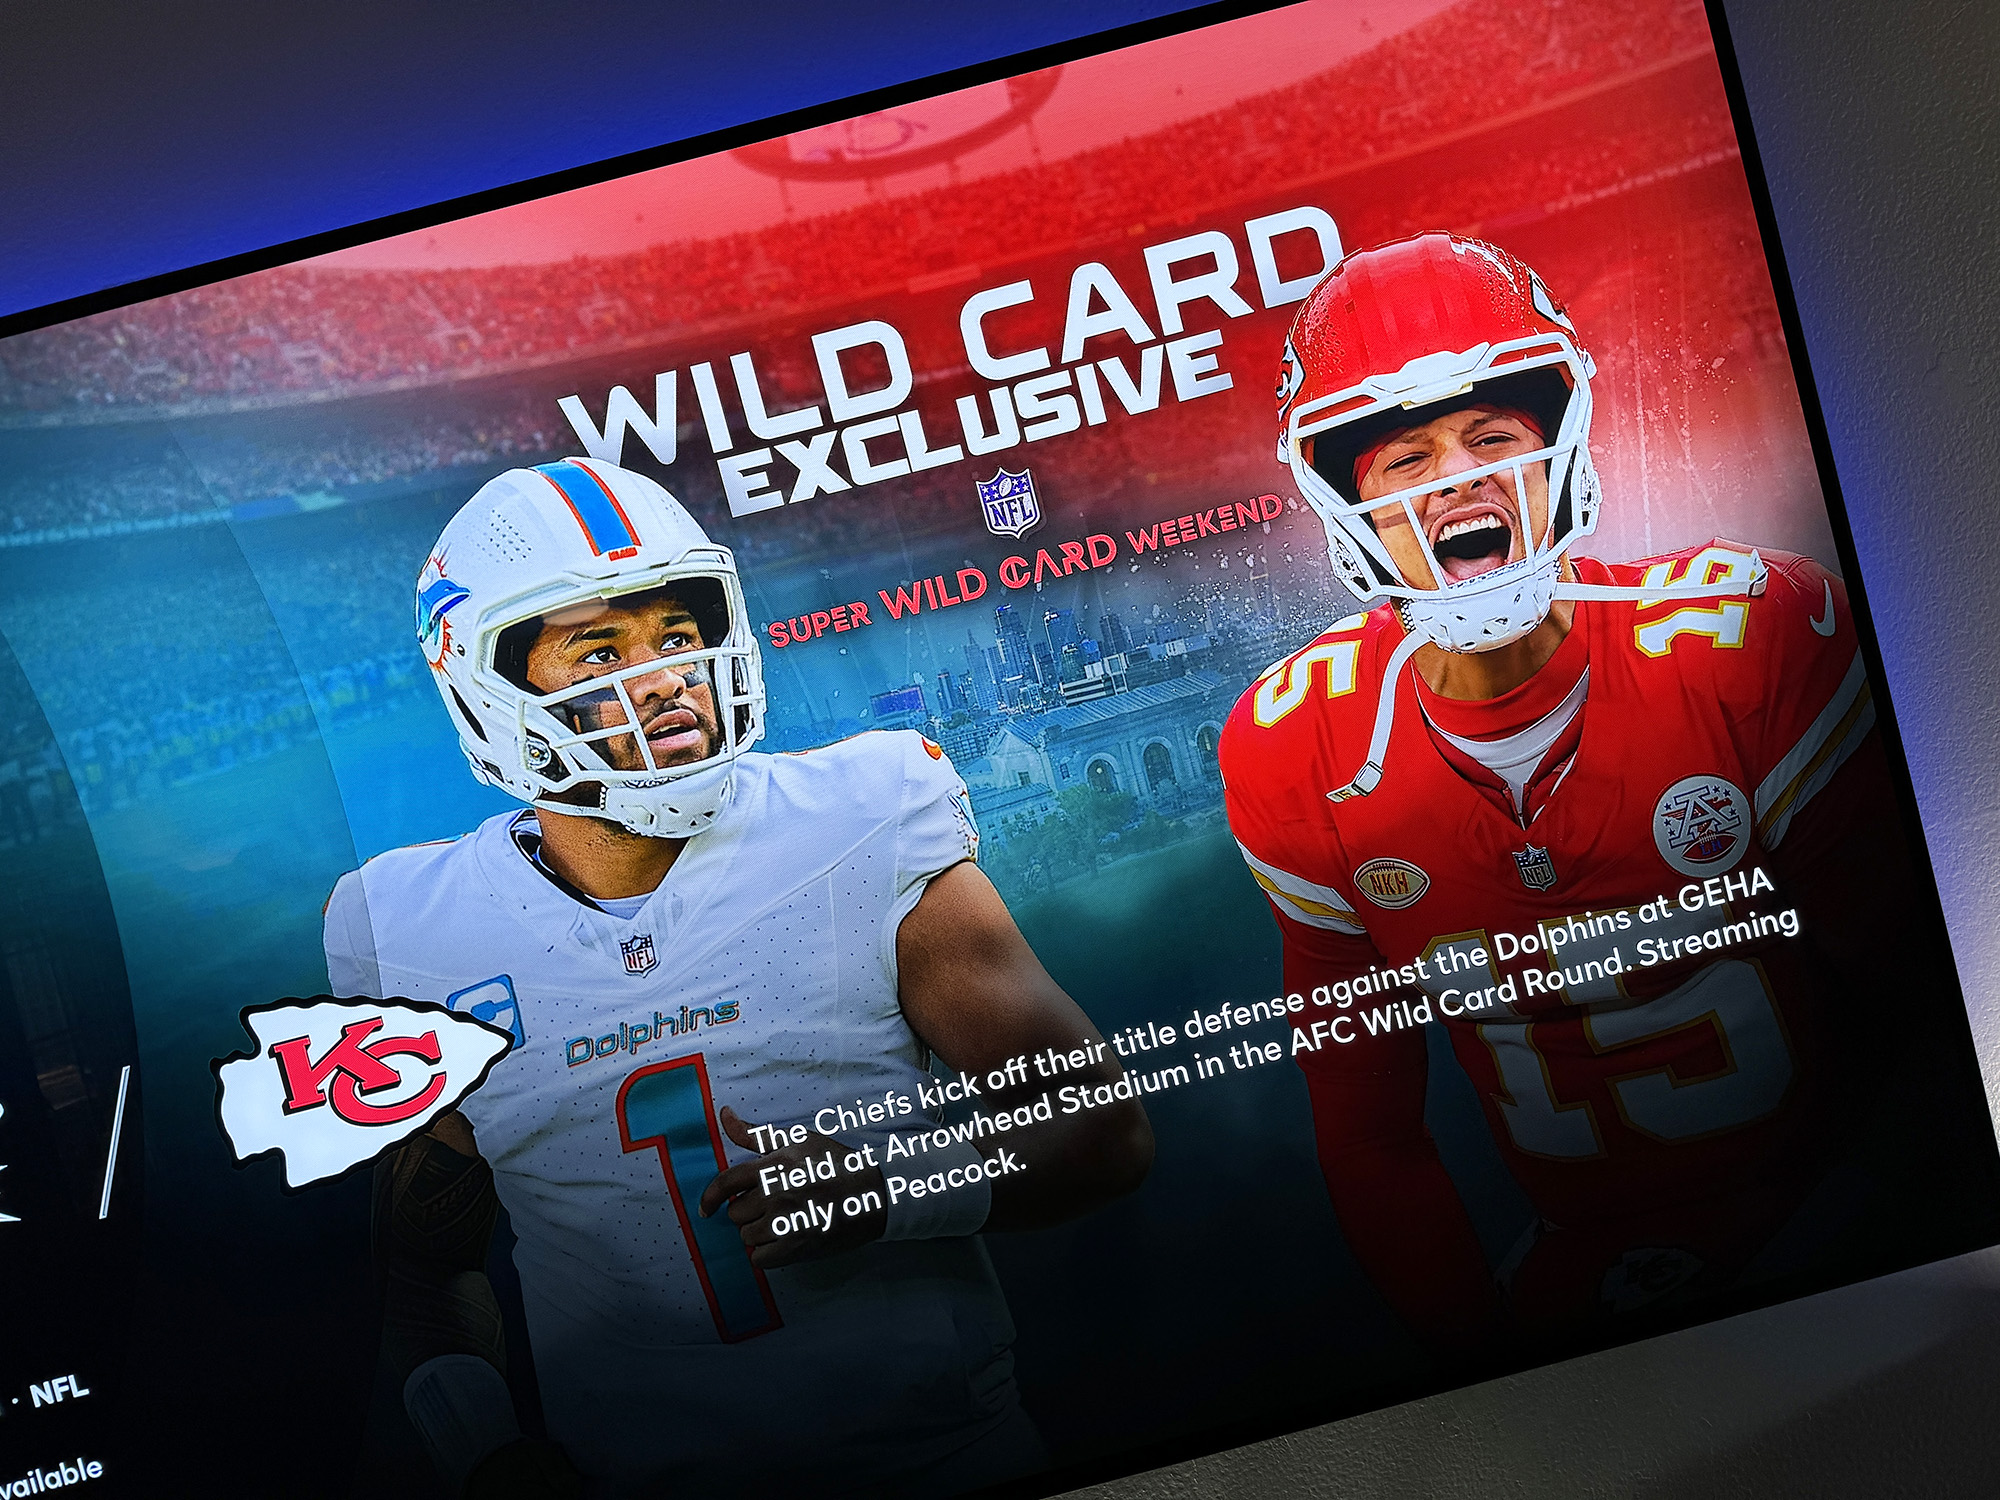 The promo screen for the Kansas City Chiefs and Miami Dolphins on the Peacock streaming service.